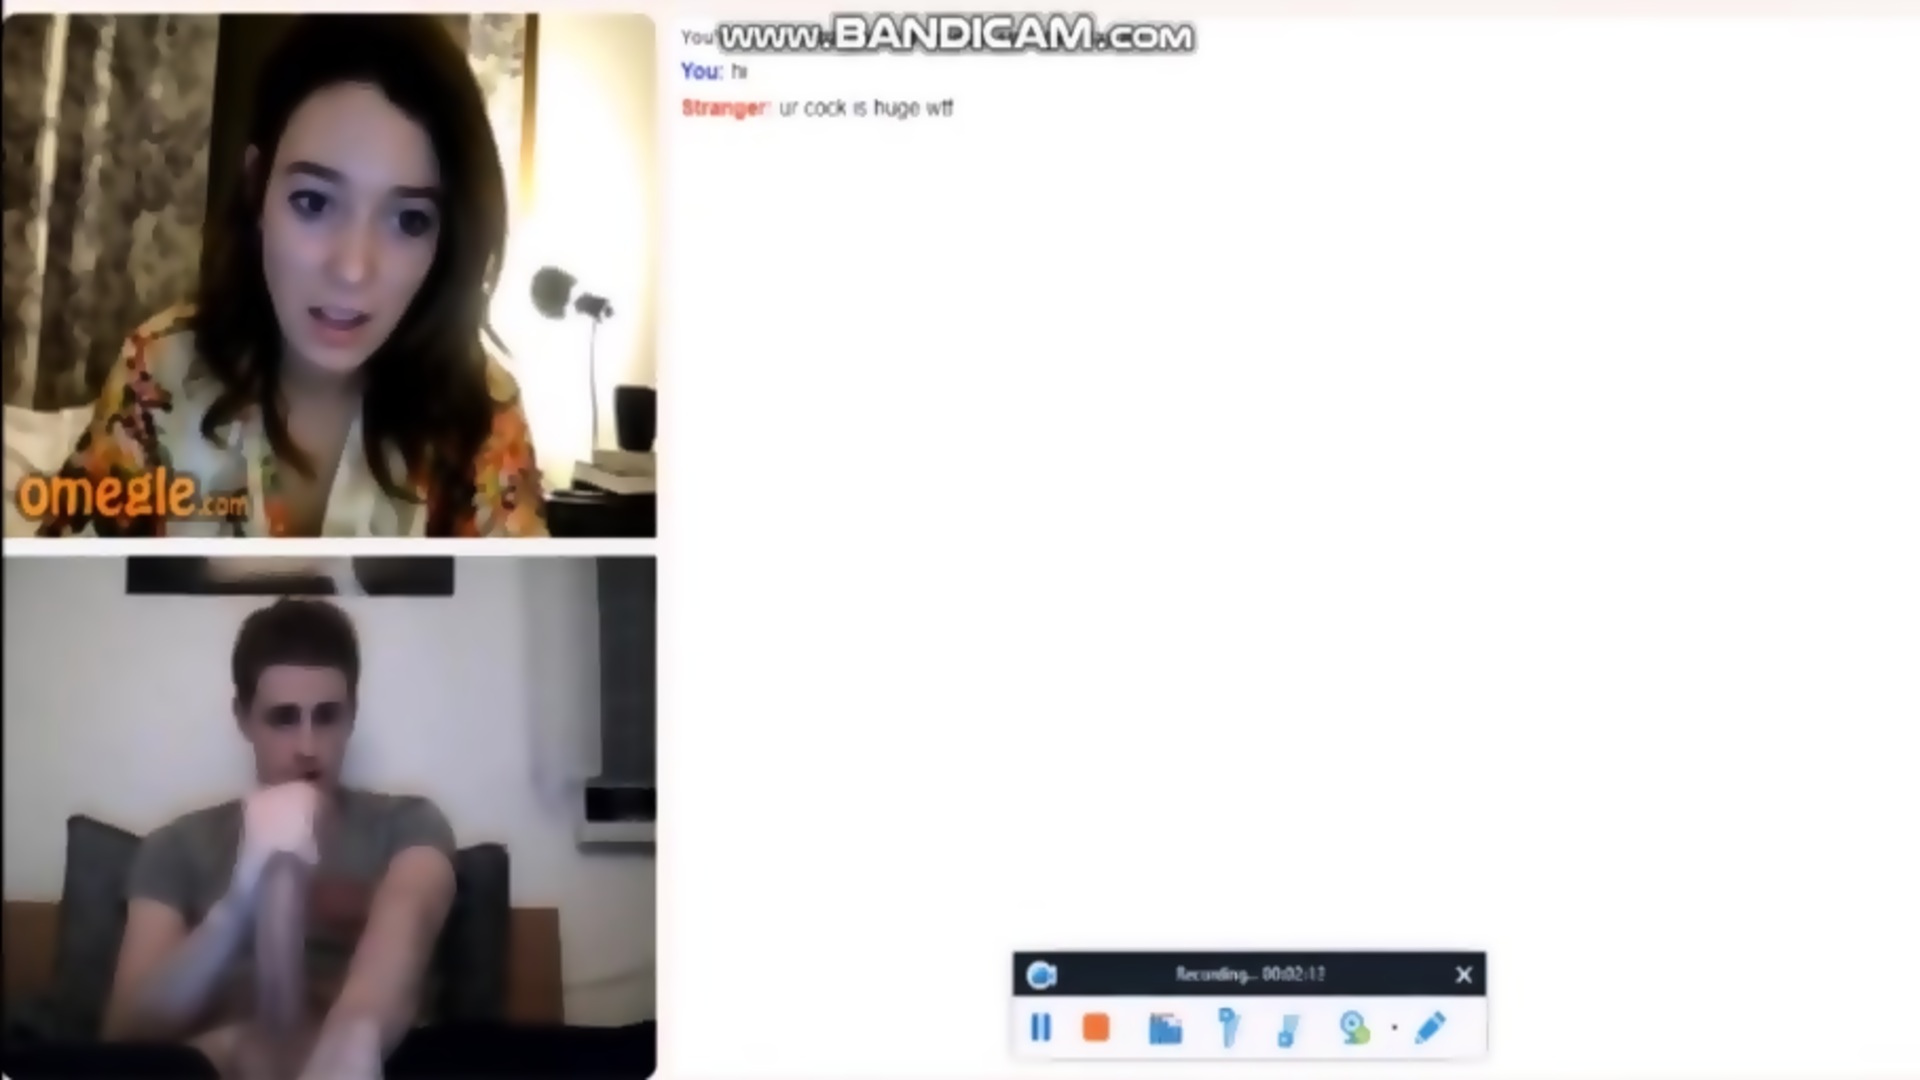 Rolly P. reccomend omegle girl flash tits for dick